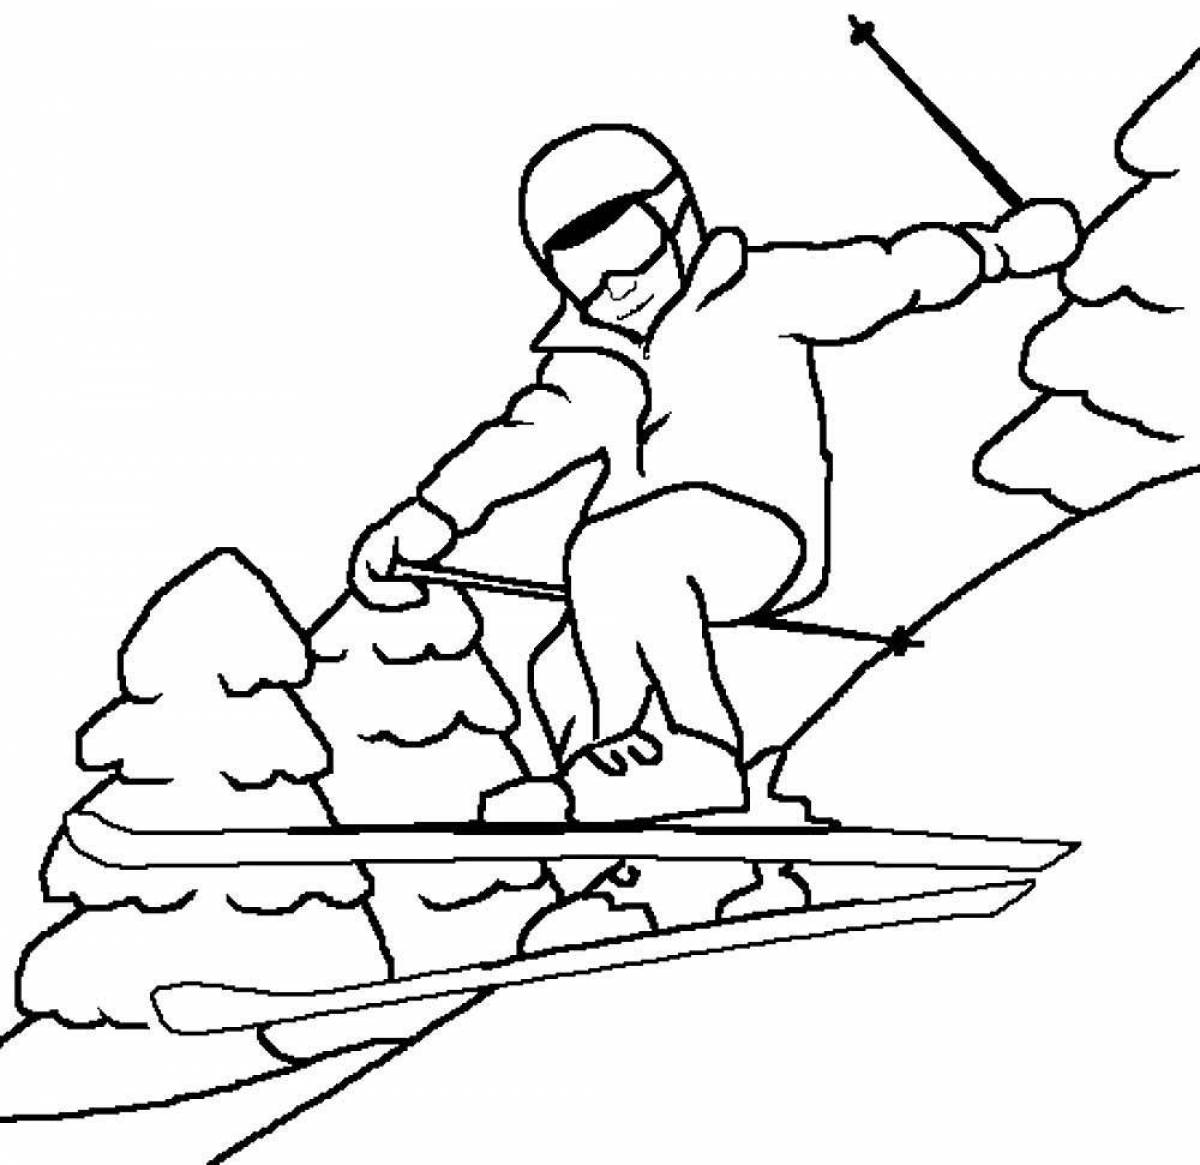 Coloring page for an exciting skier